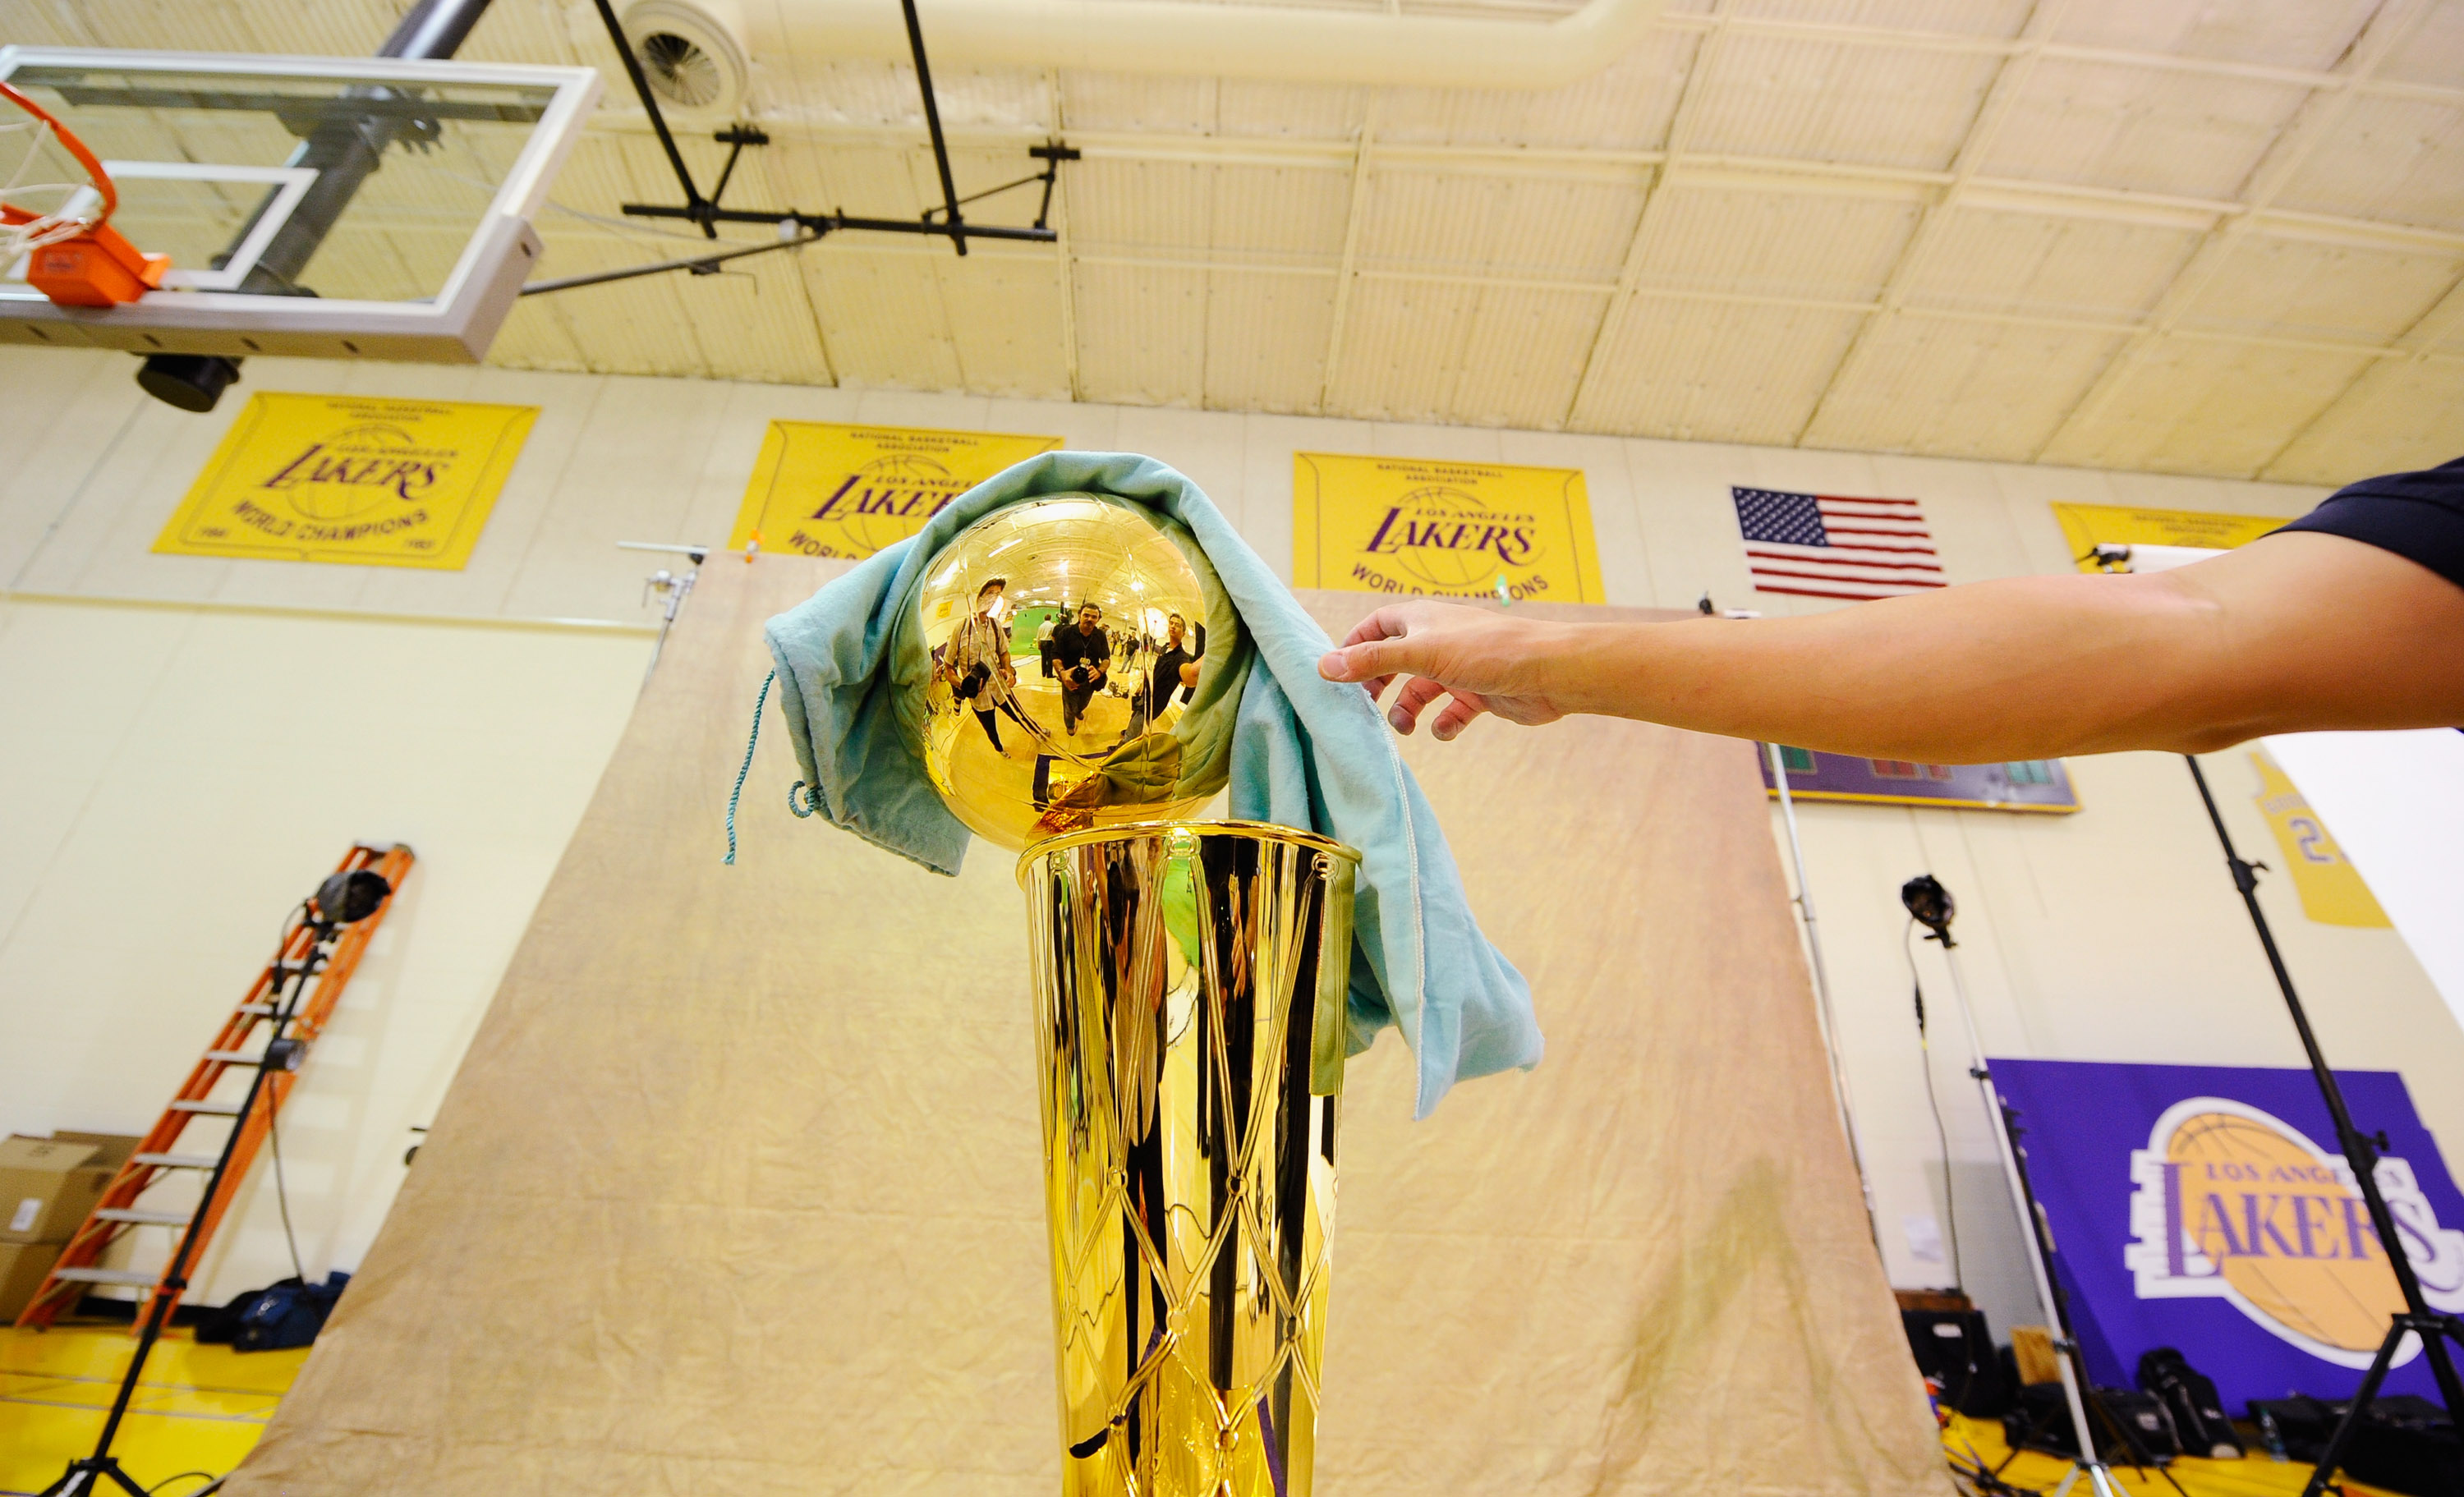 EL SEGUNDO, CA - SEPTEMBER 25:  NBA Finals Larry O'Brien Championship Trophy is covered with a protective cloth as it rest on a stand during Los Angeles Lakers Media Day at the Toyota Center on September 25, 2010 in El Segundo, California. NOTE TO USER: U